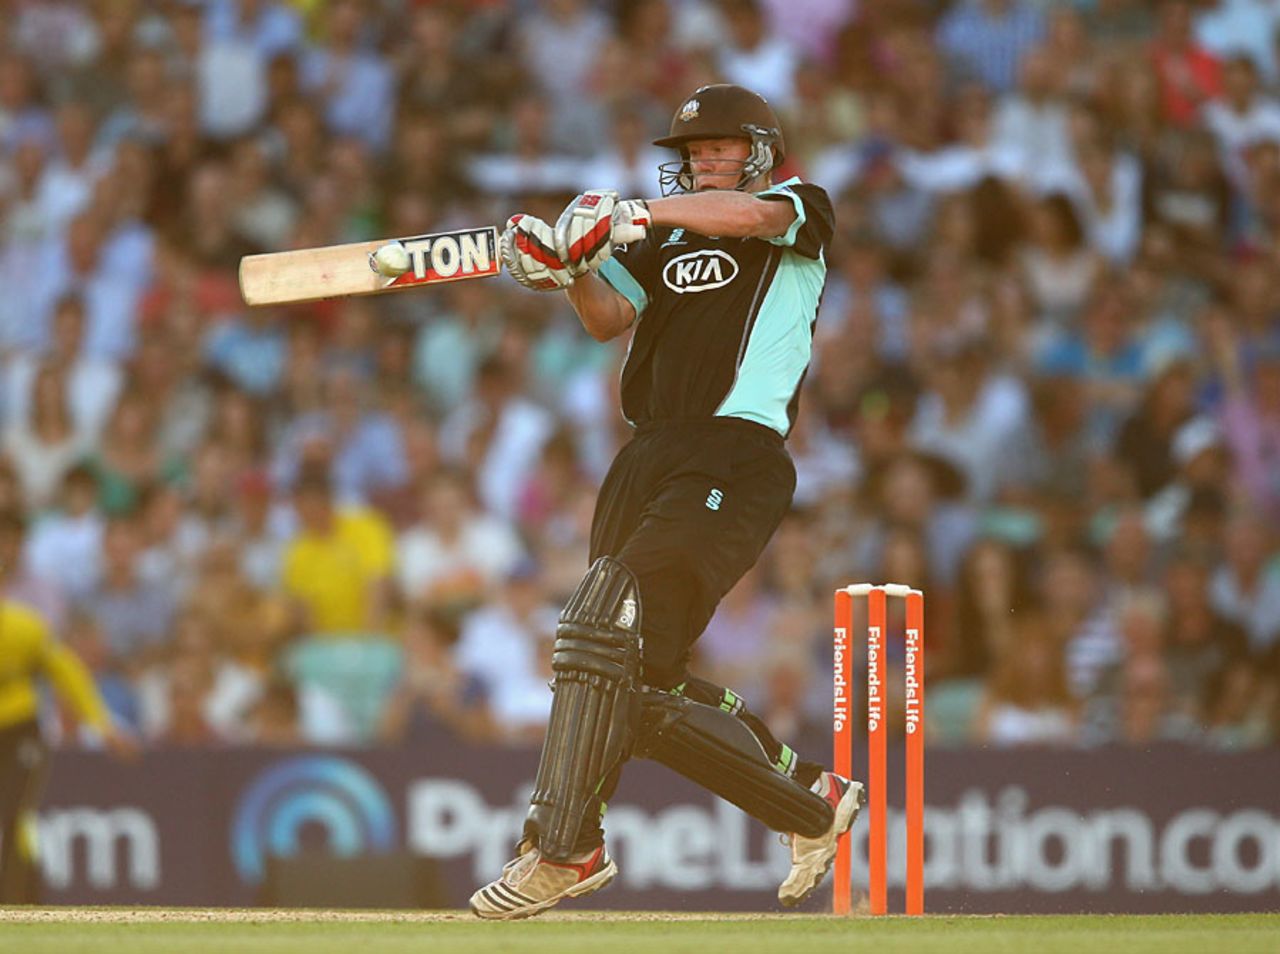 Kevin O'Brien pulls, Surrey v Hampshire, FLt20, South Group, The Oval, July 19, 2013